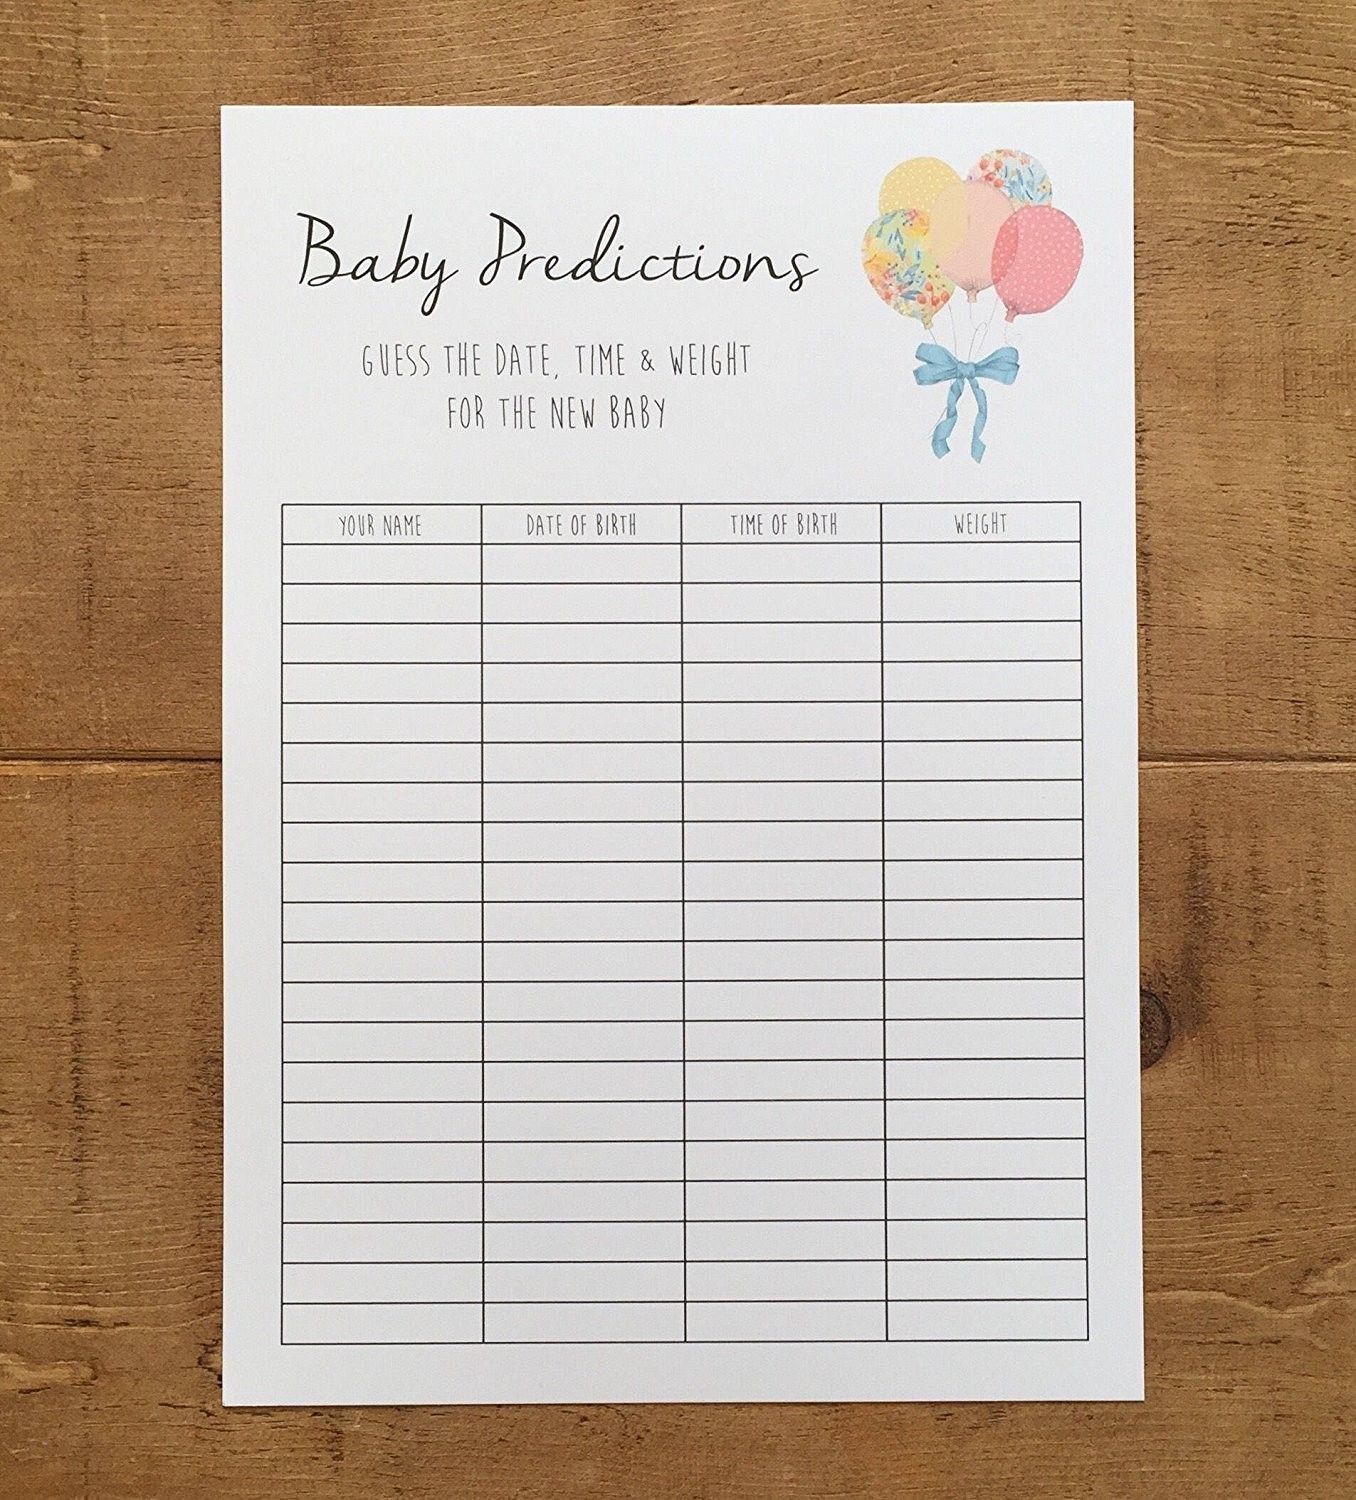 babies due date guess large print out 44